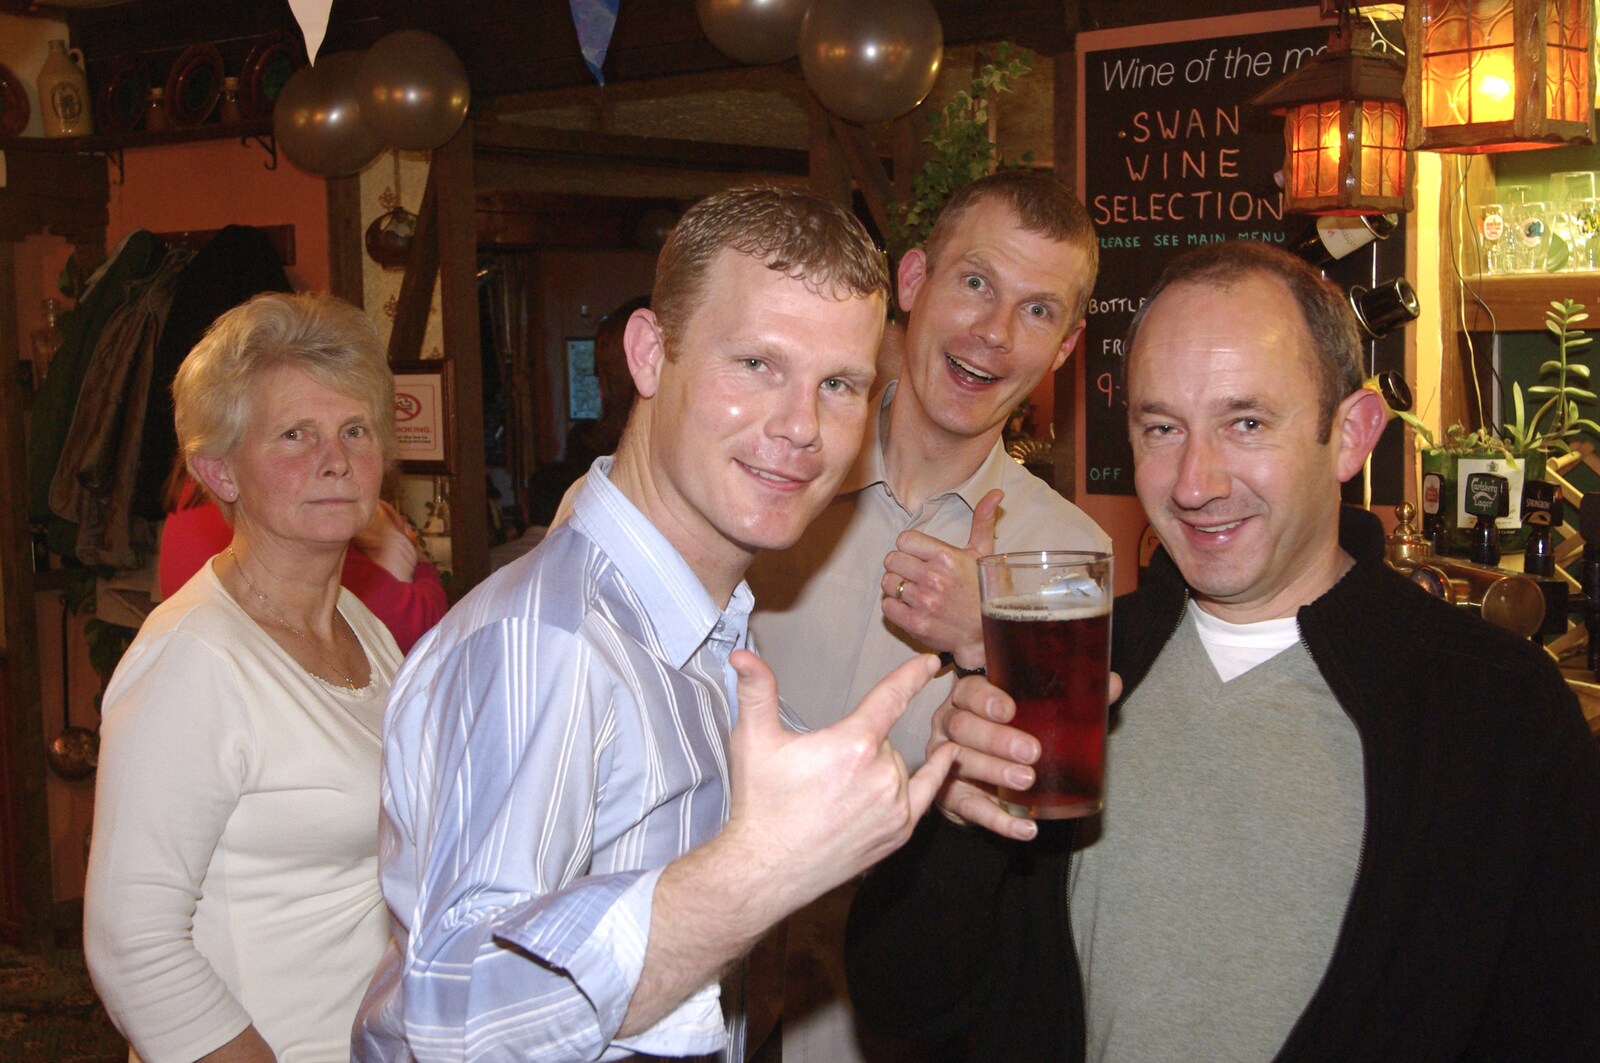 The Swan's 25th Anniversary, Brome, Suffolk - 14th November 2008: Mikey-P, Andy and DH with a beer